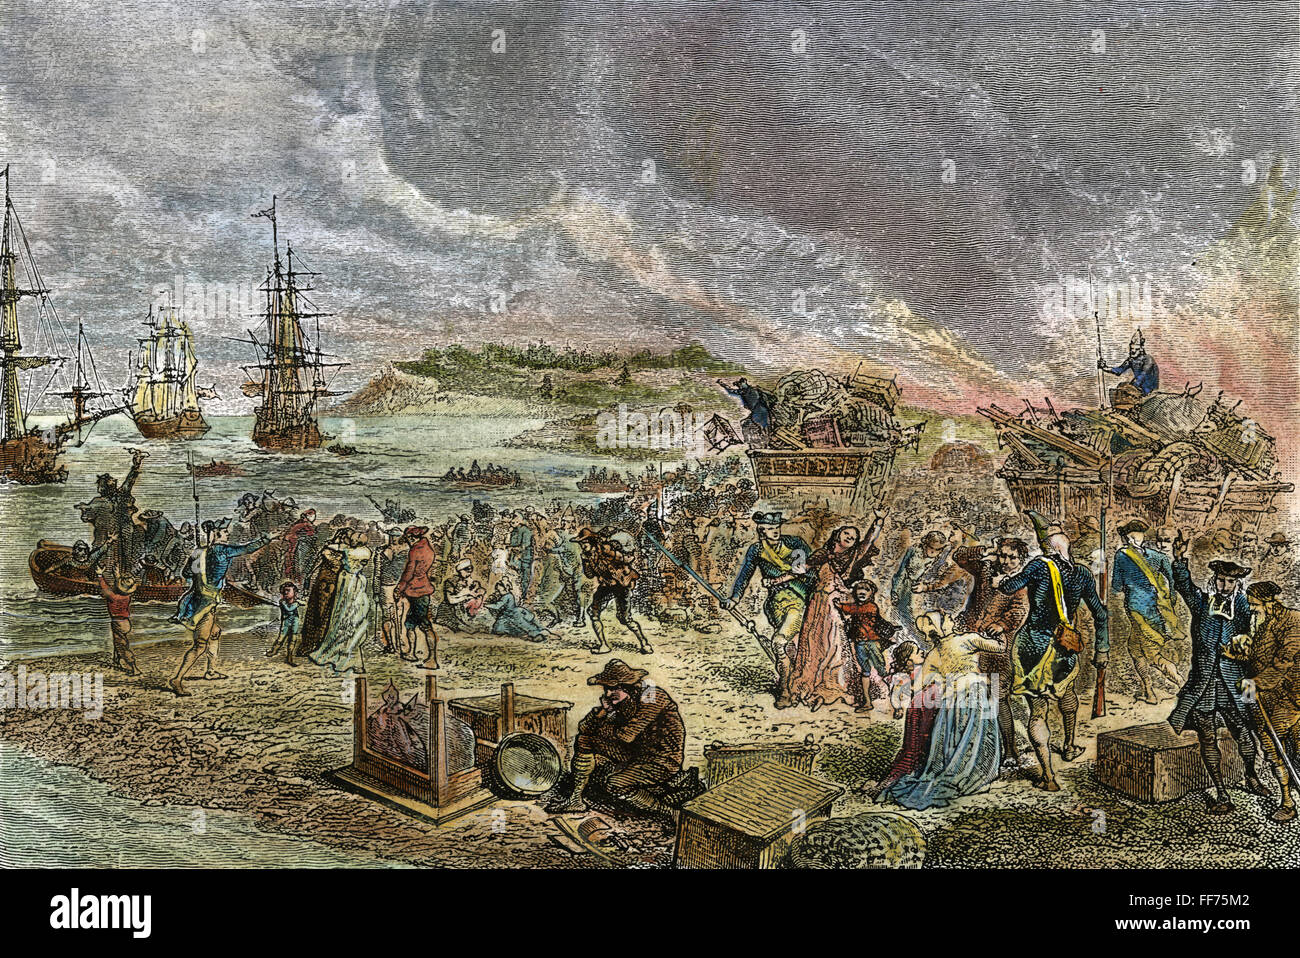 ACADIAN EXPULSION, 1755. /nThe removal of the Acadians from Nova Scotia by the British in 1755. Color engraving, 19th century. Stock Photo